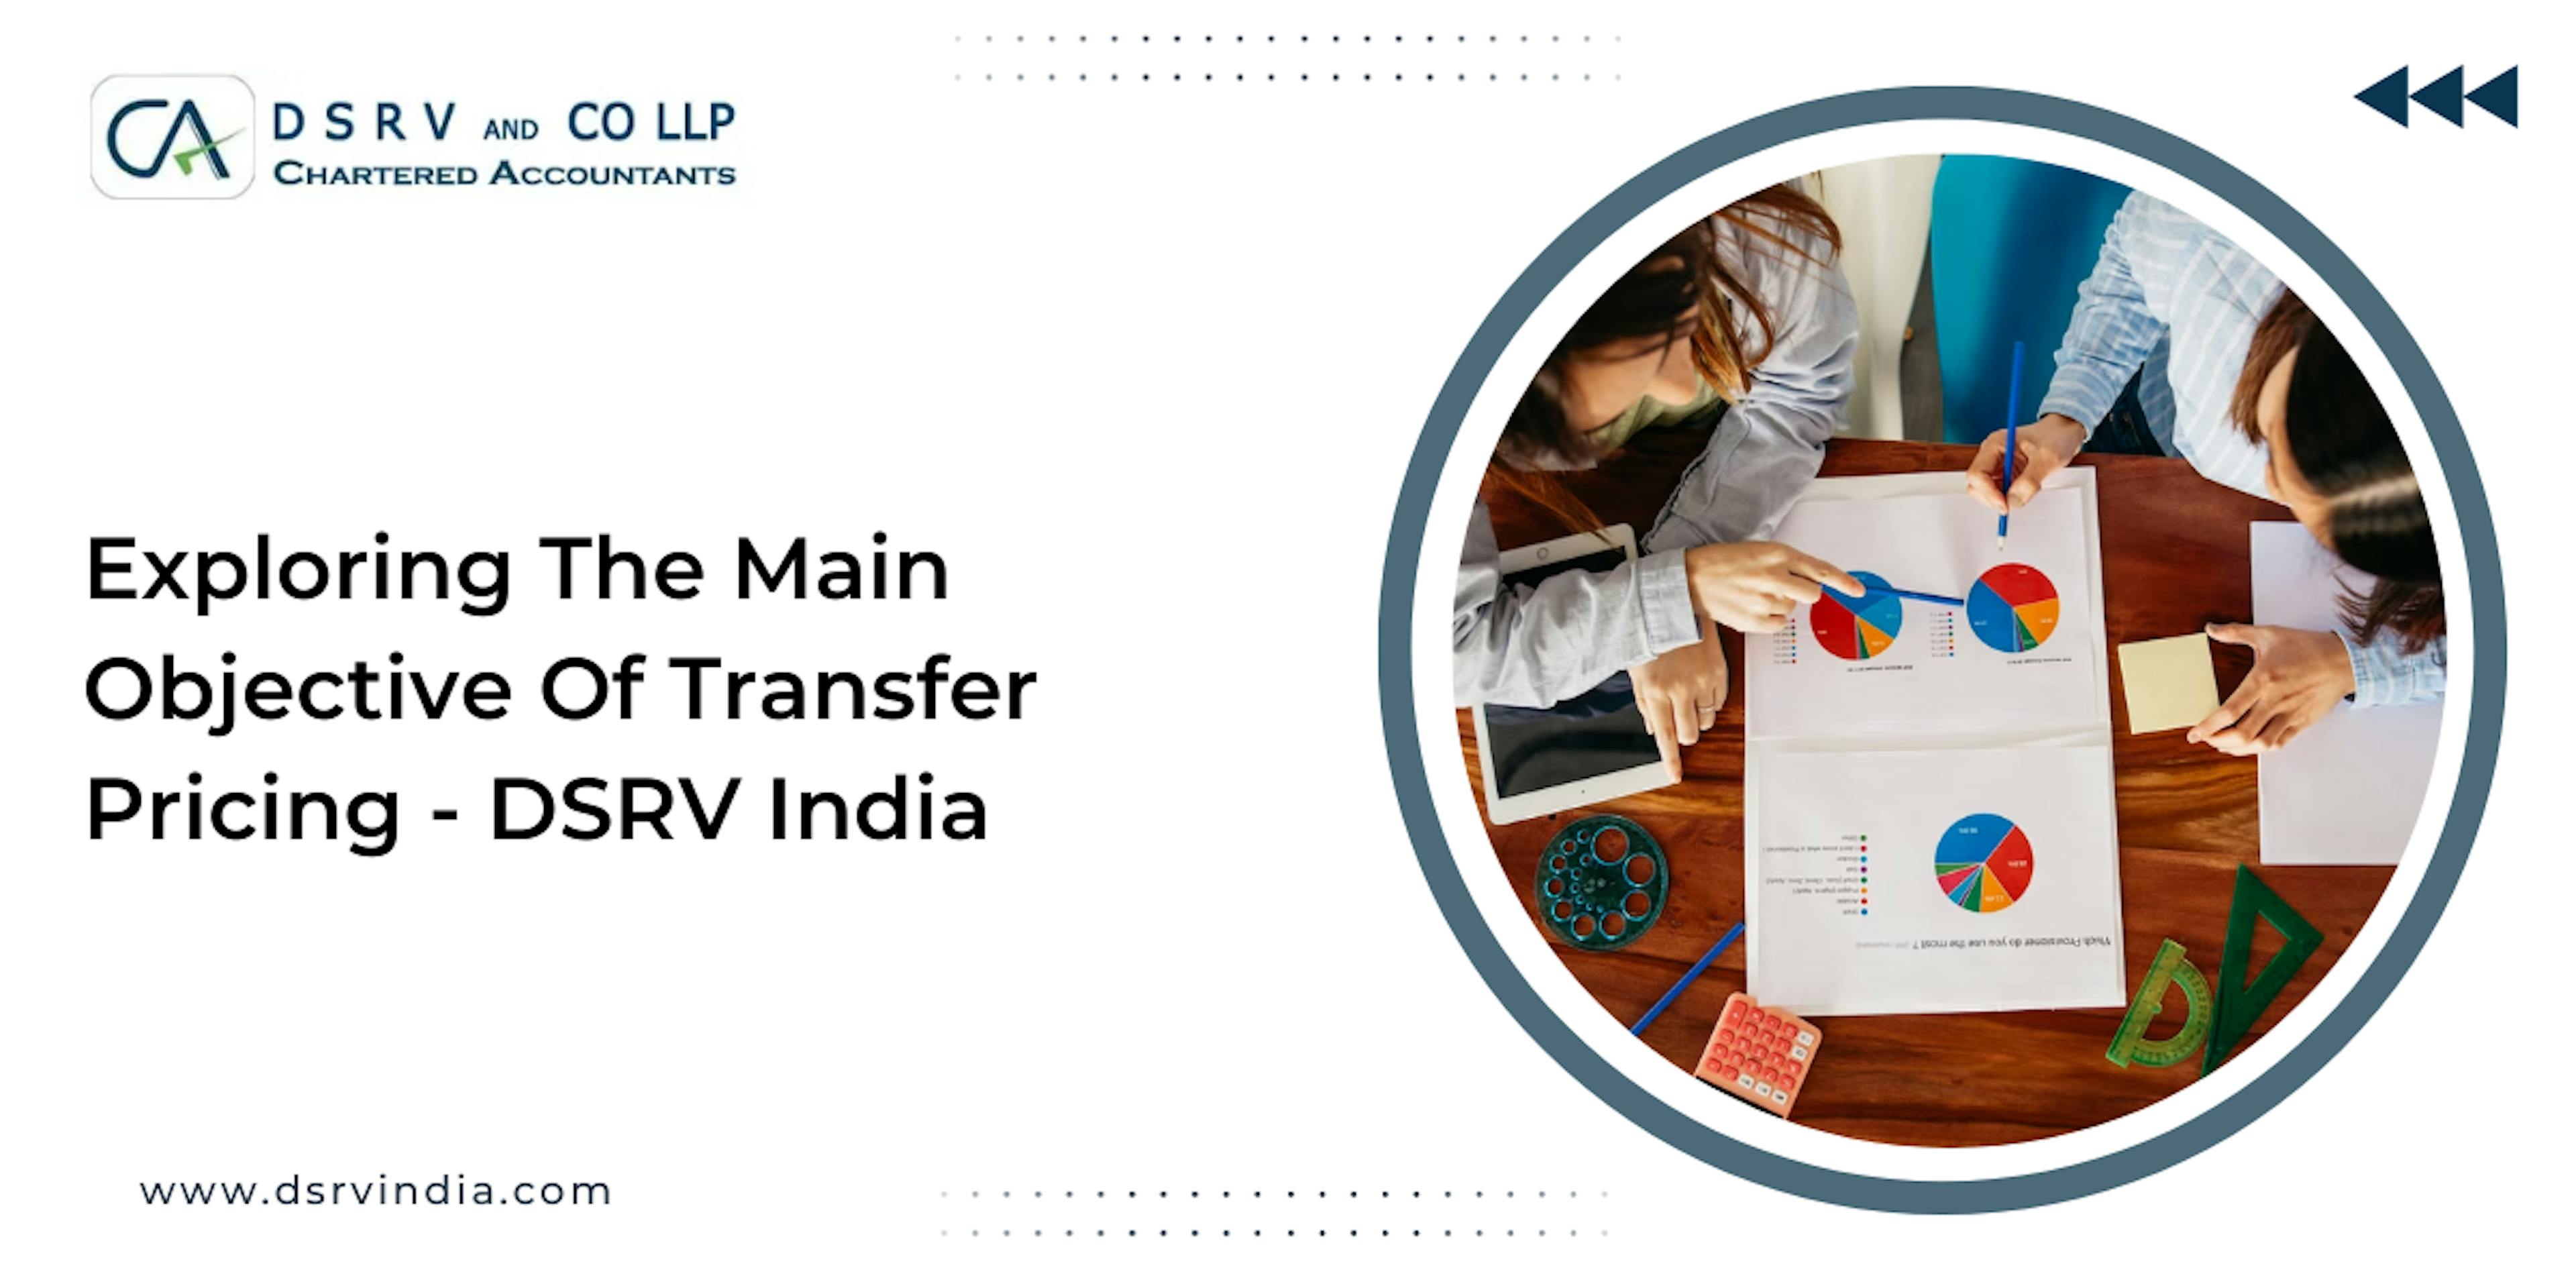 EXPLORING THE MAIN OBJECTIVE OF TRANSFER PRICING - DSRV INDIA